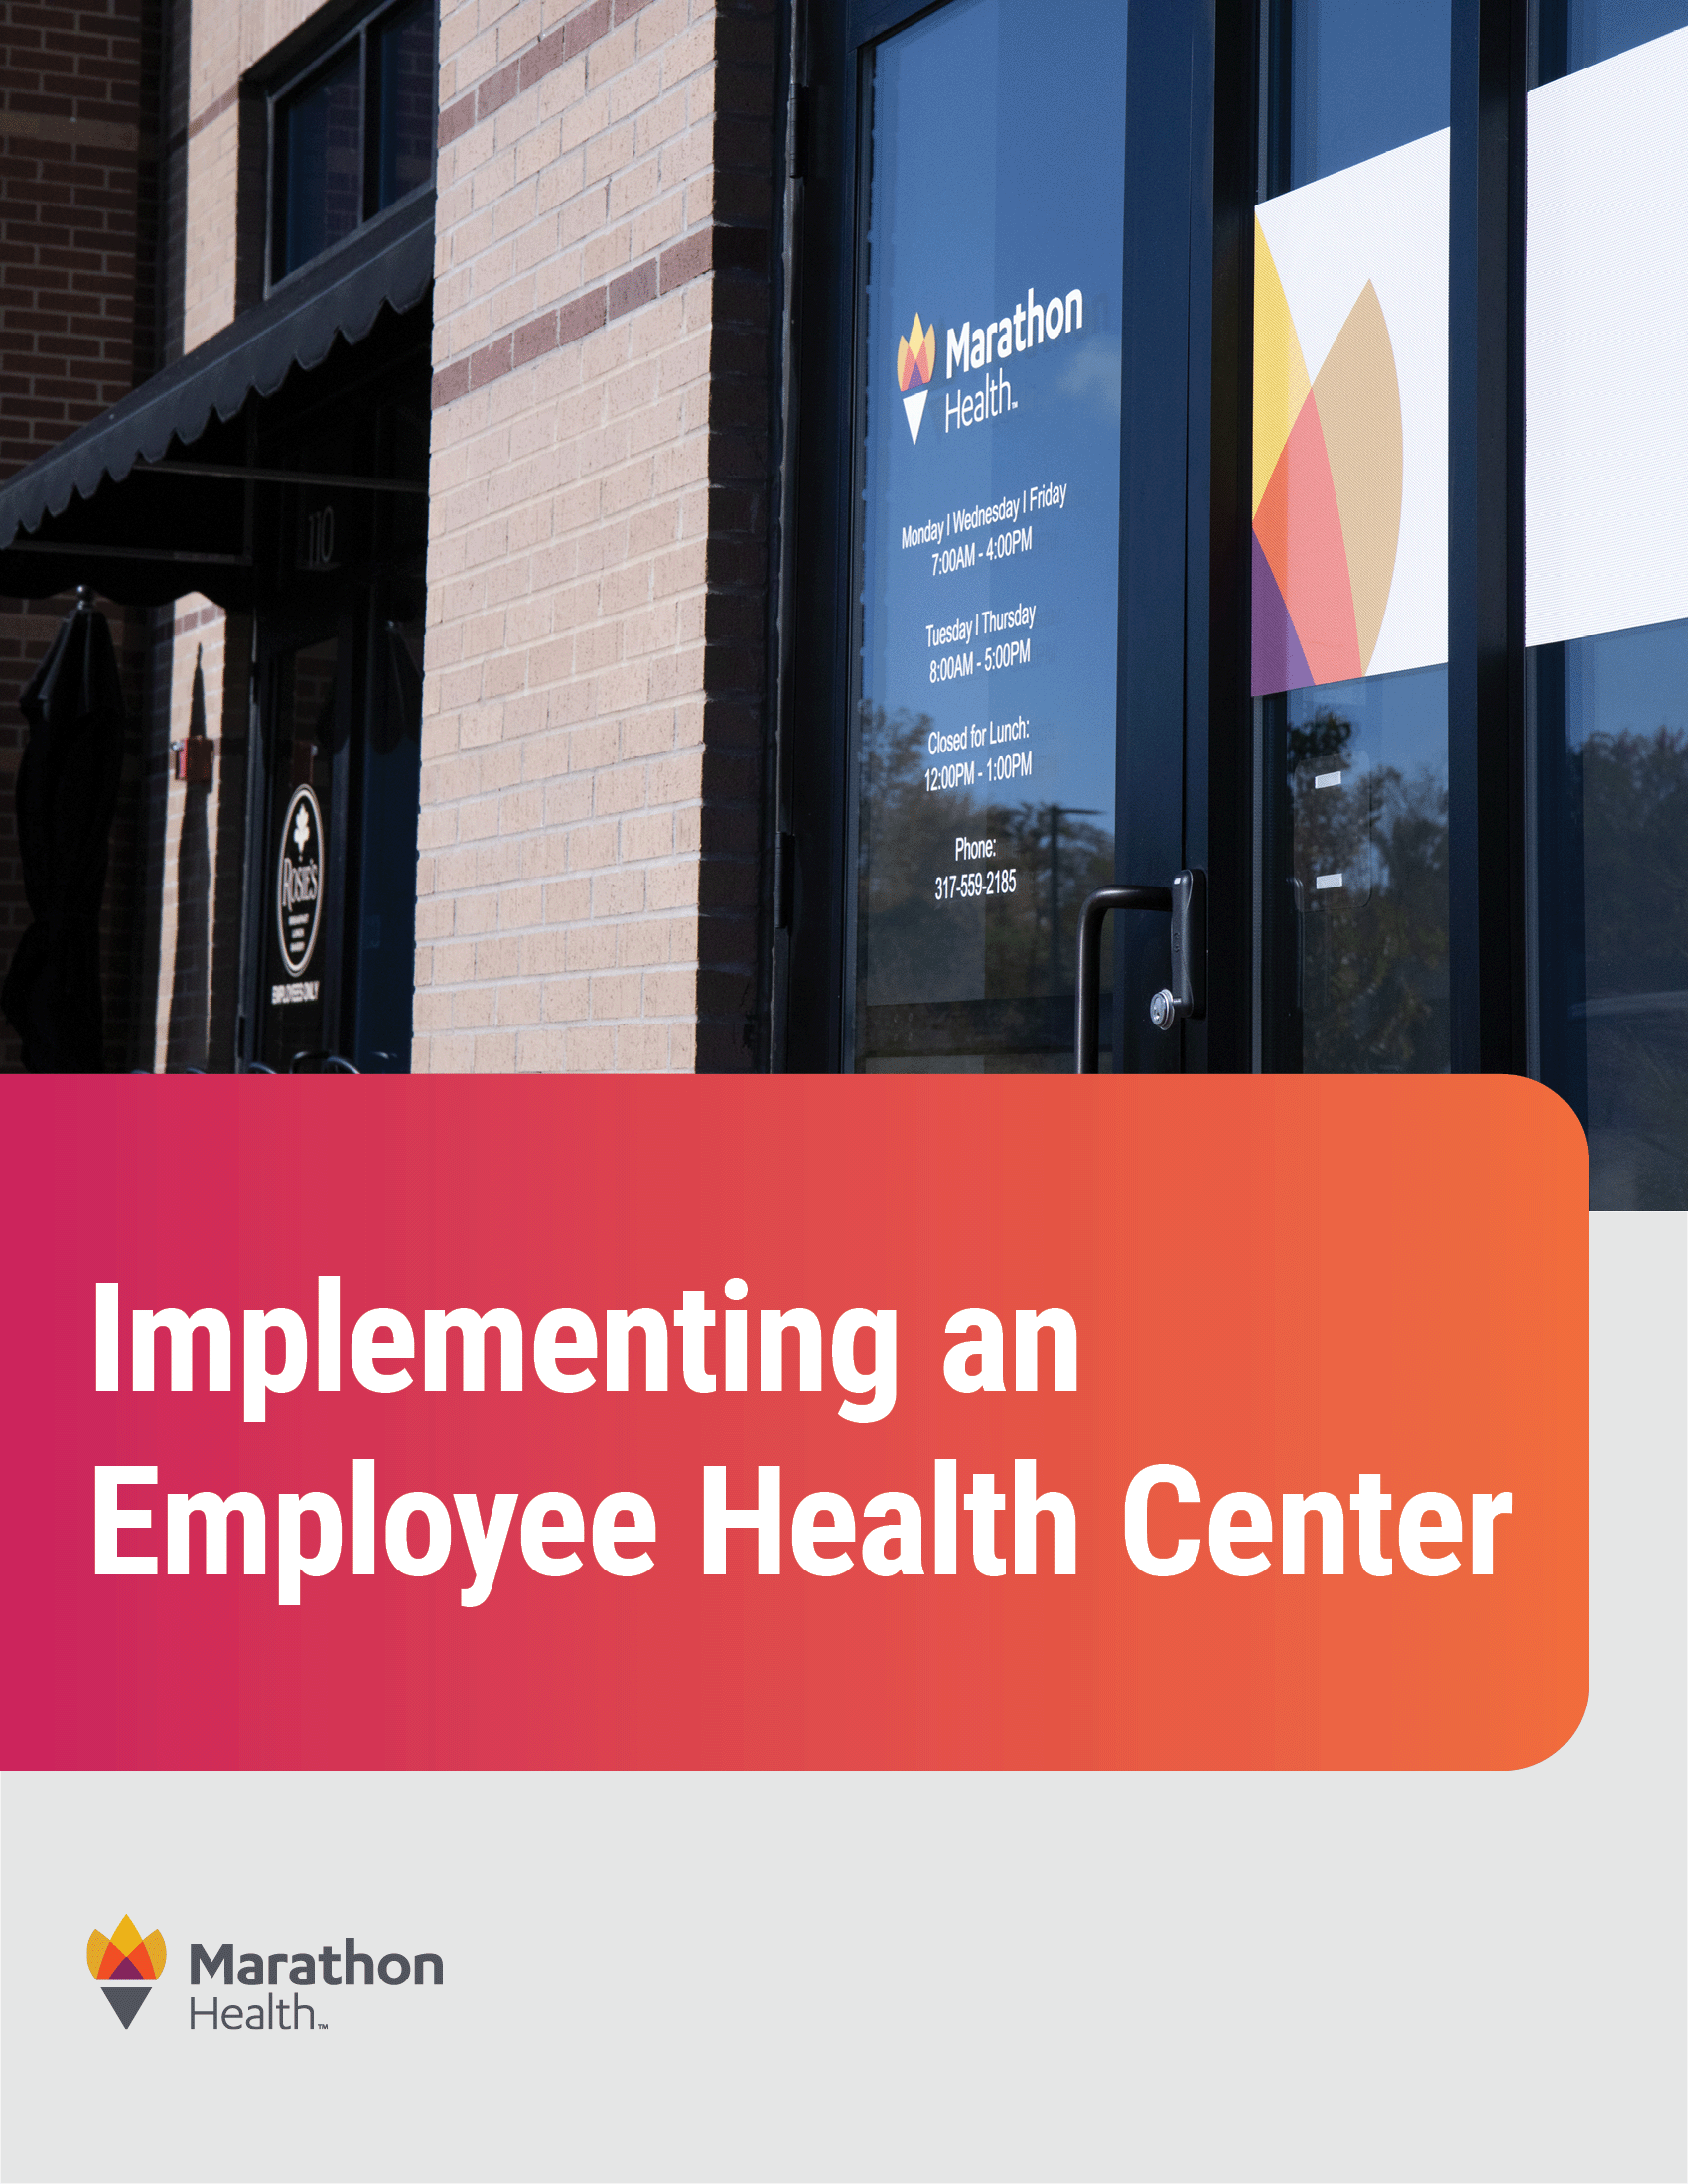 Implementing an employee health center